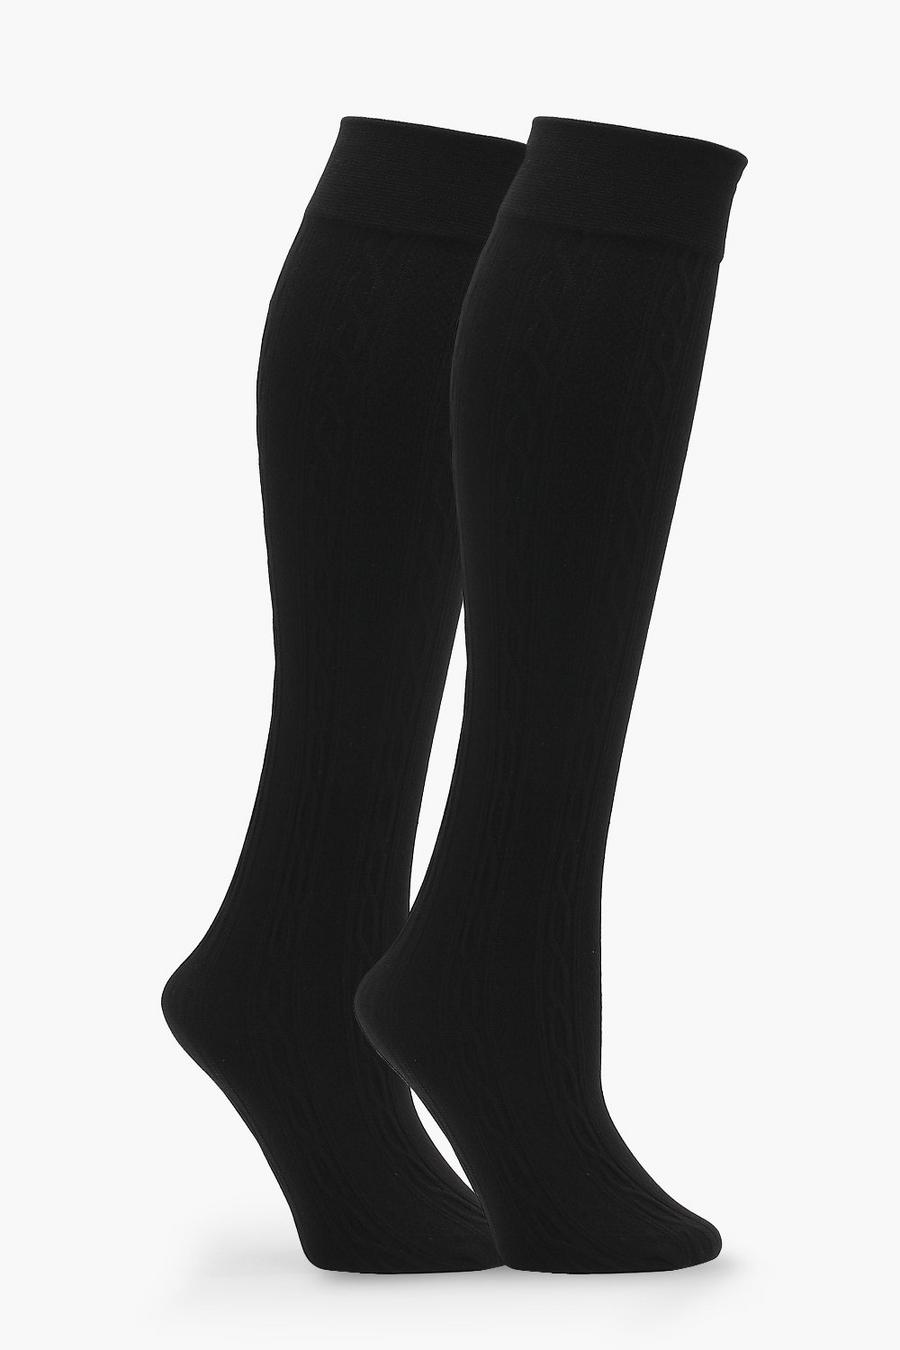 Ava 3 Pack Cable Knit Thermal Knee High Socks image number 1